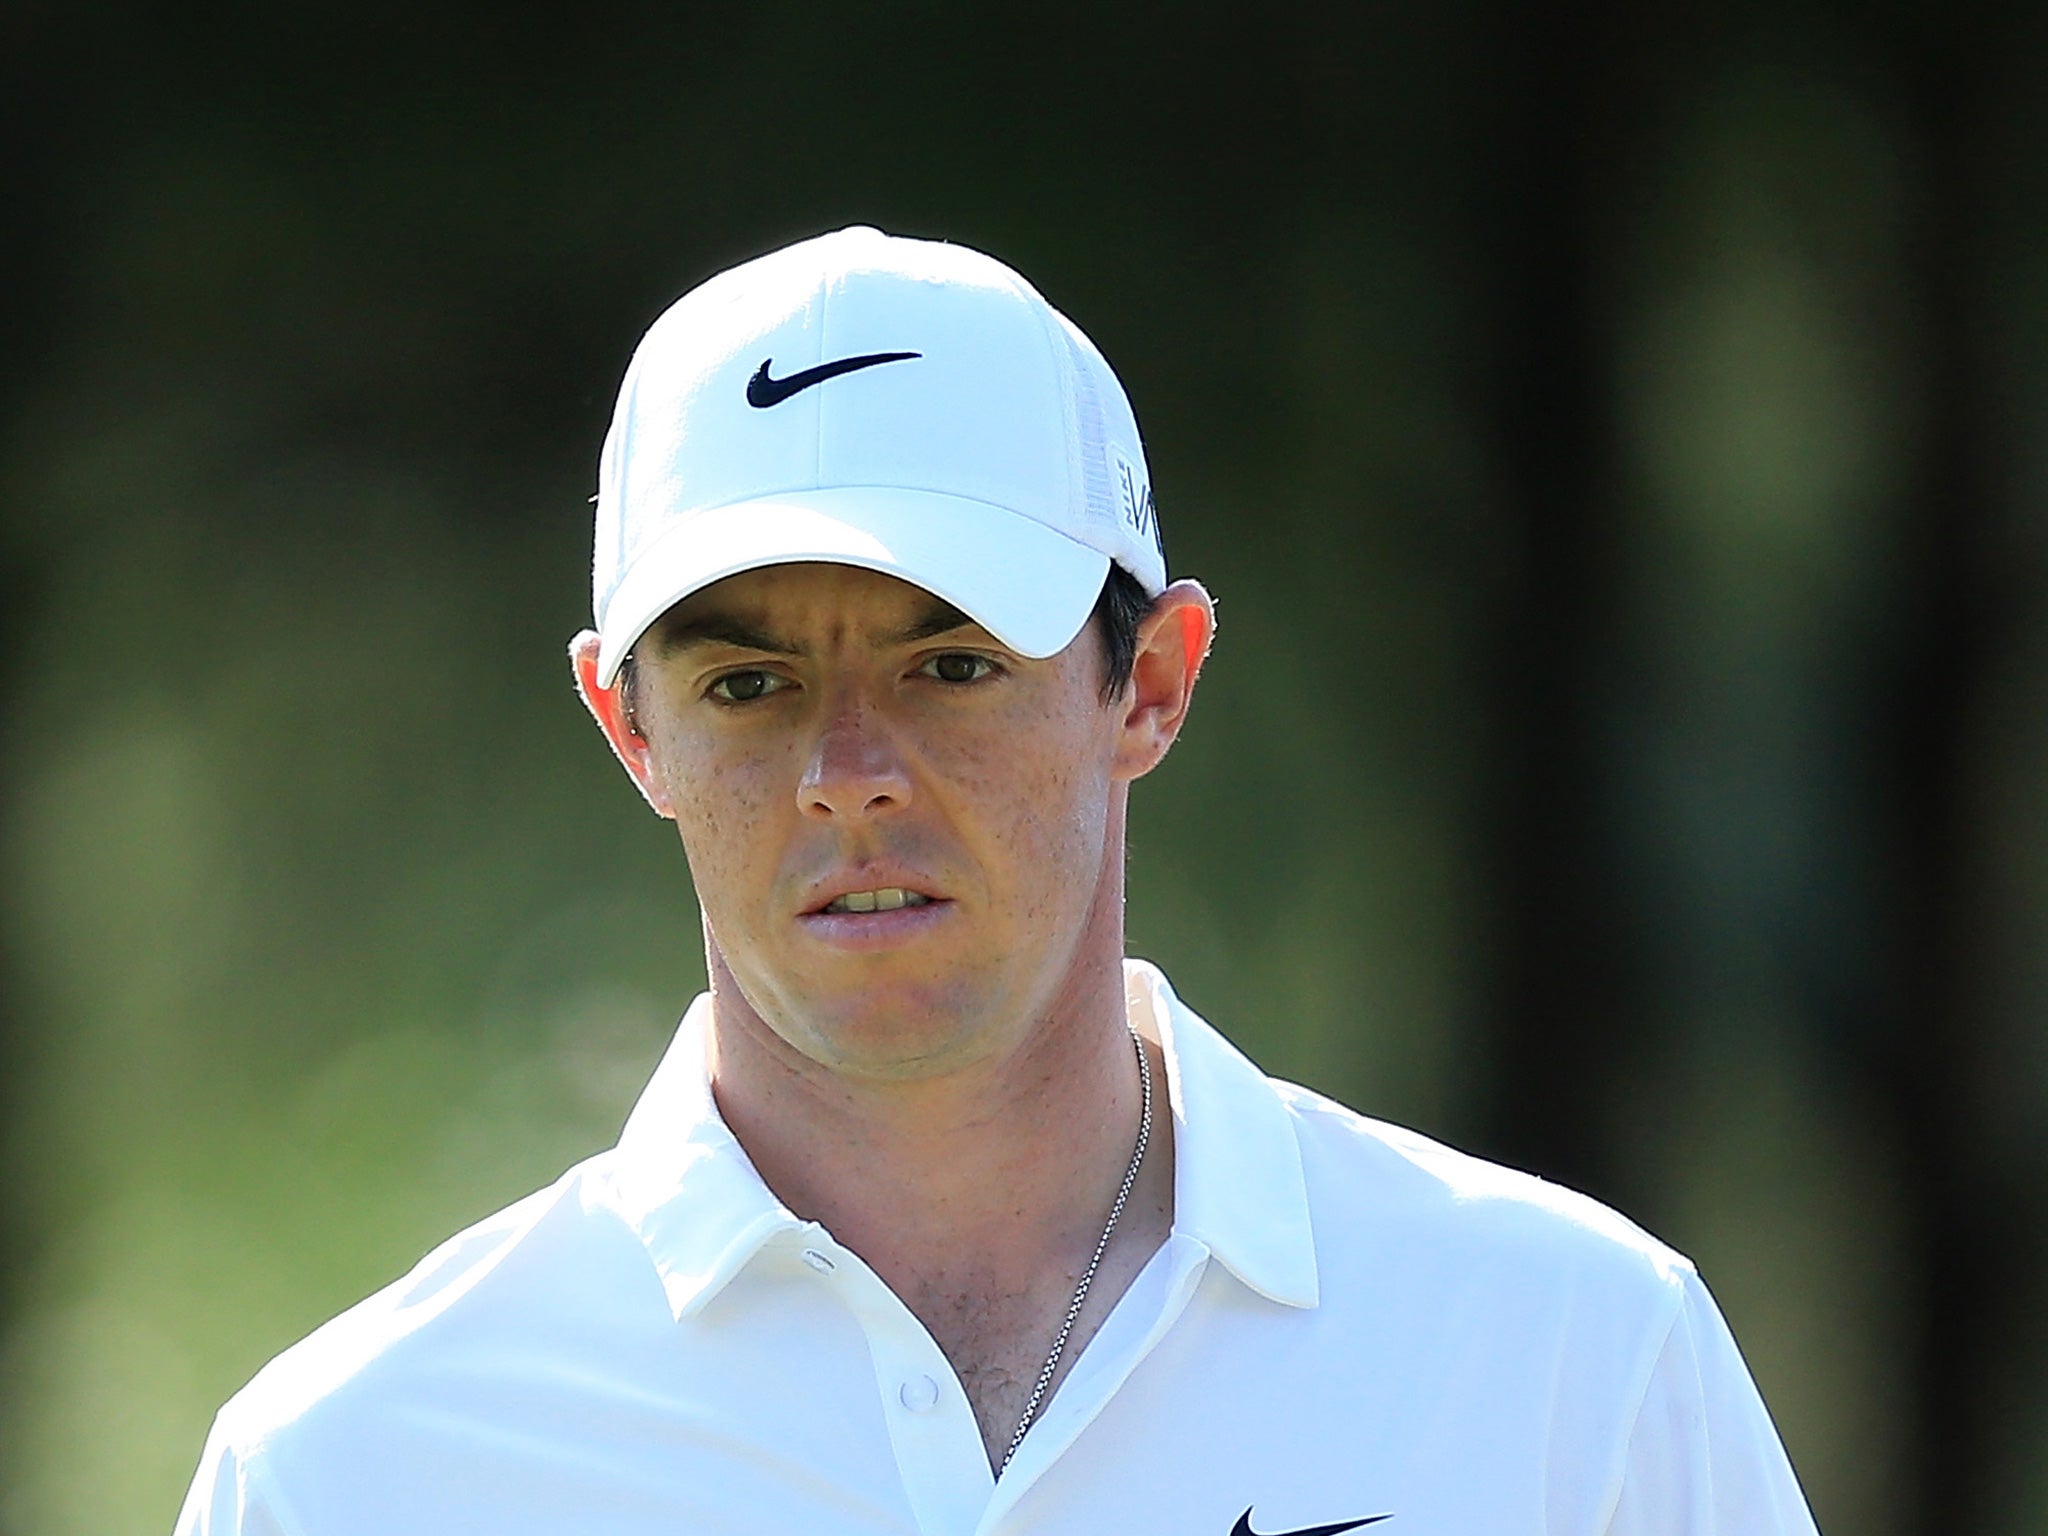 Rory McIlroy shot 67 to close to within four shots of the lead in the Turkish Airlines Open yesterday